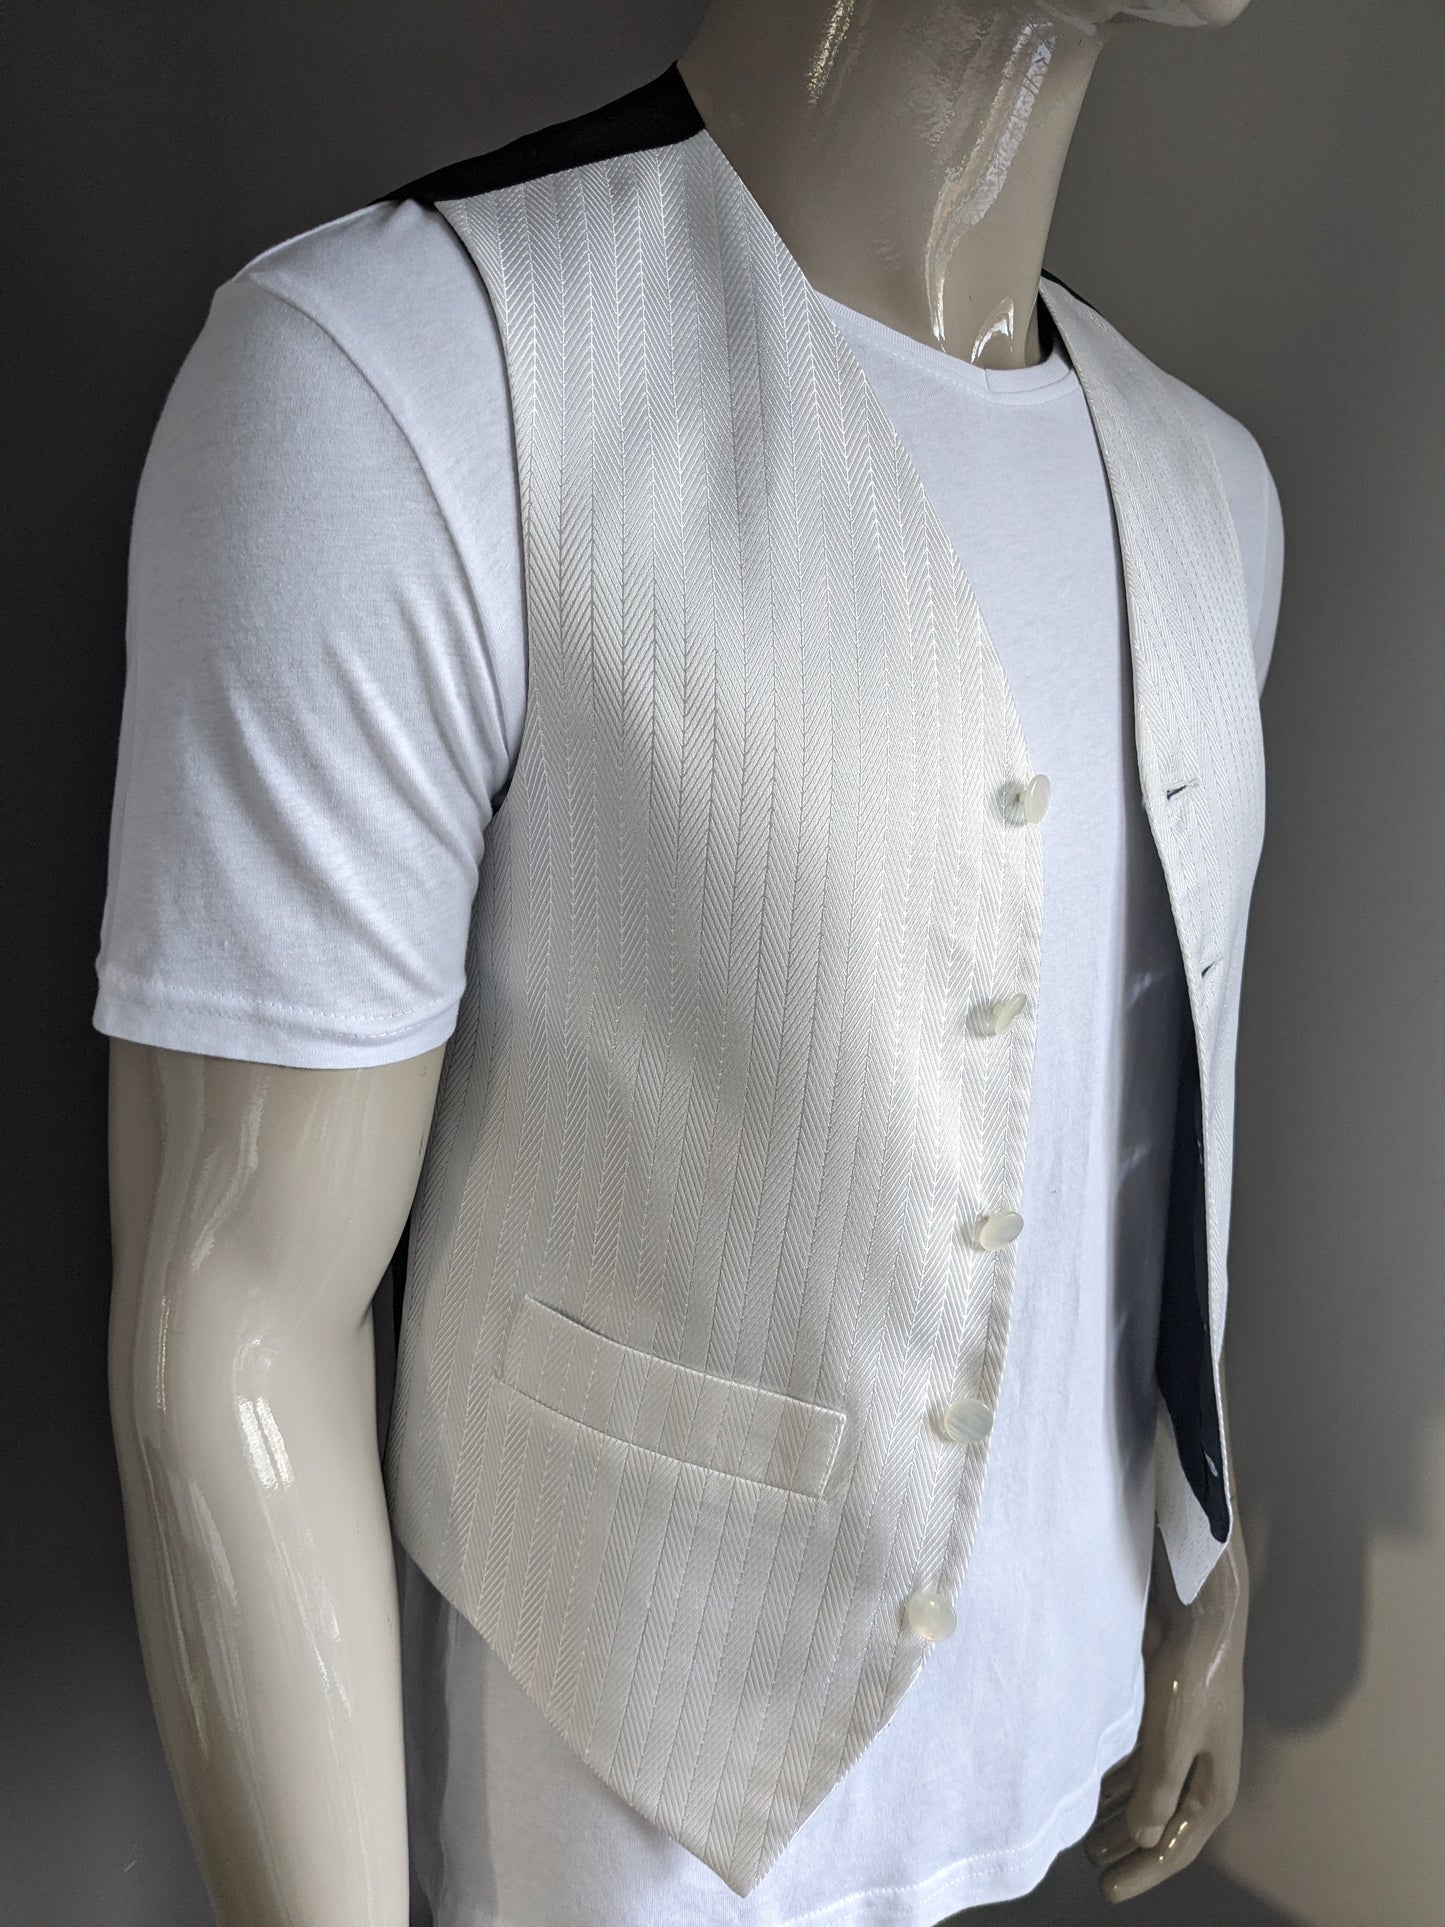 FH waistcoat. White silver -colored motif. Size S.